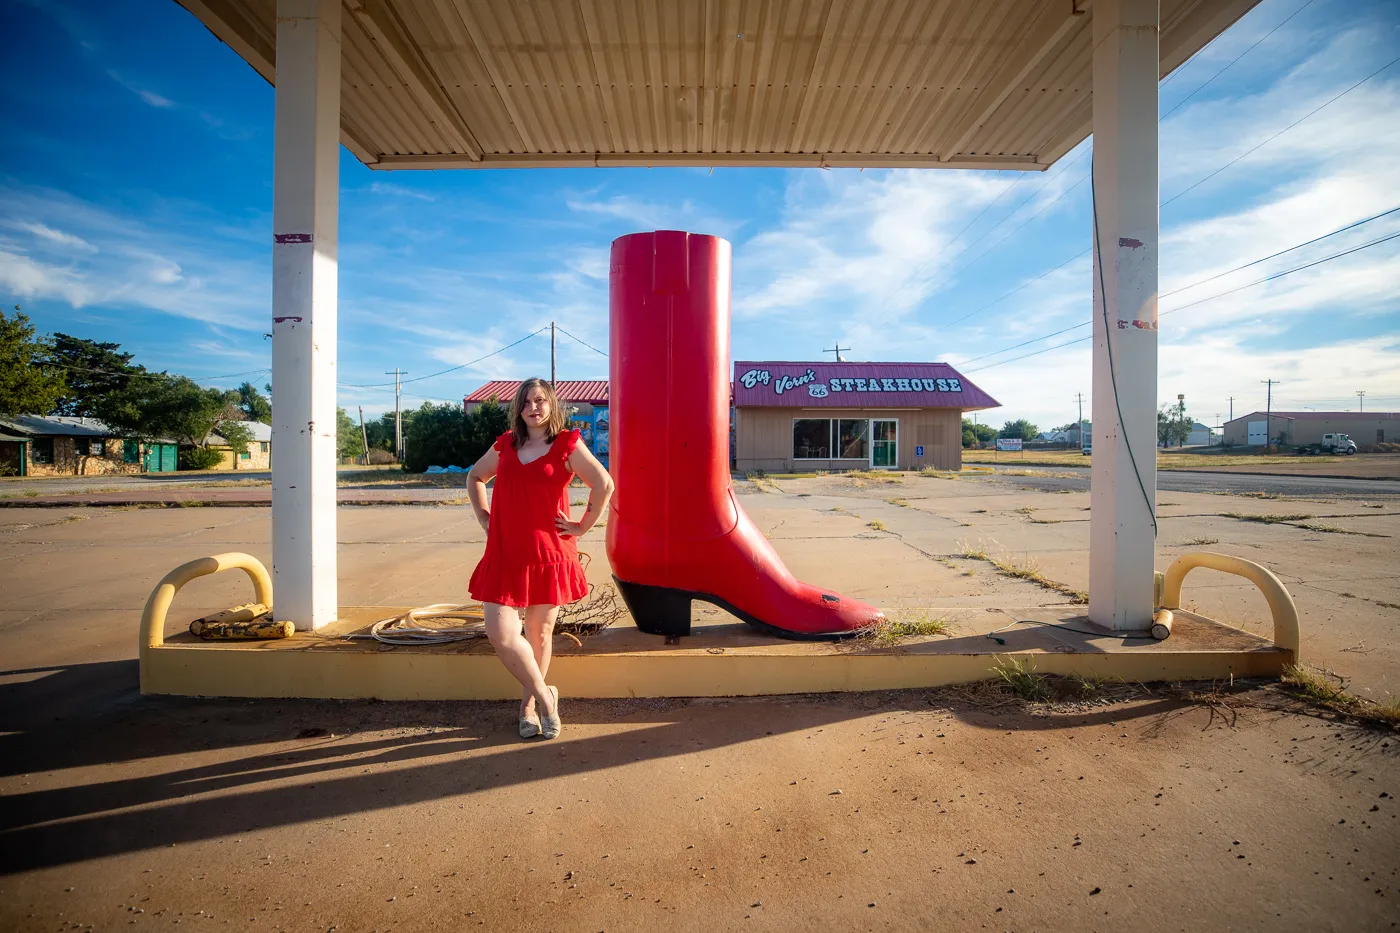 Big Red Cowboy Boot at Big Vern’s Steakhouse in Shamrock, Texas Route 66 roadside attraction